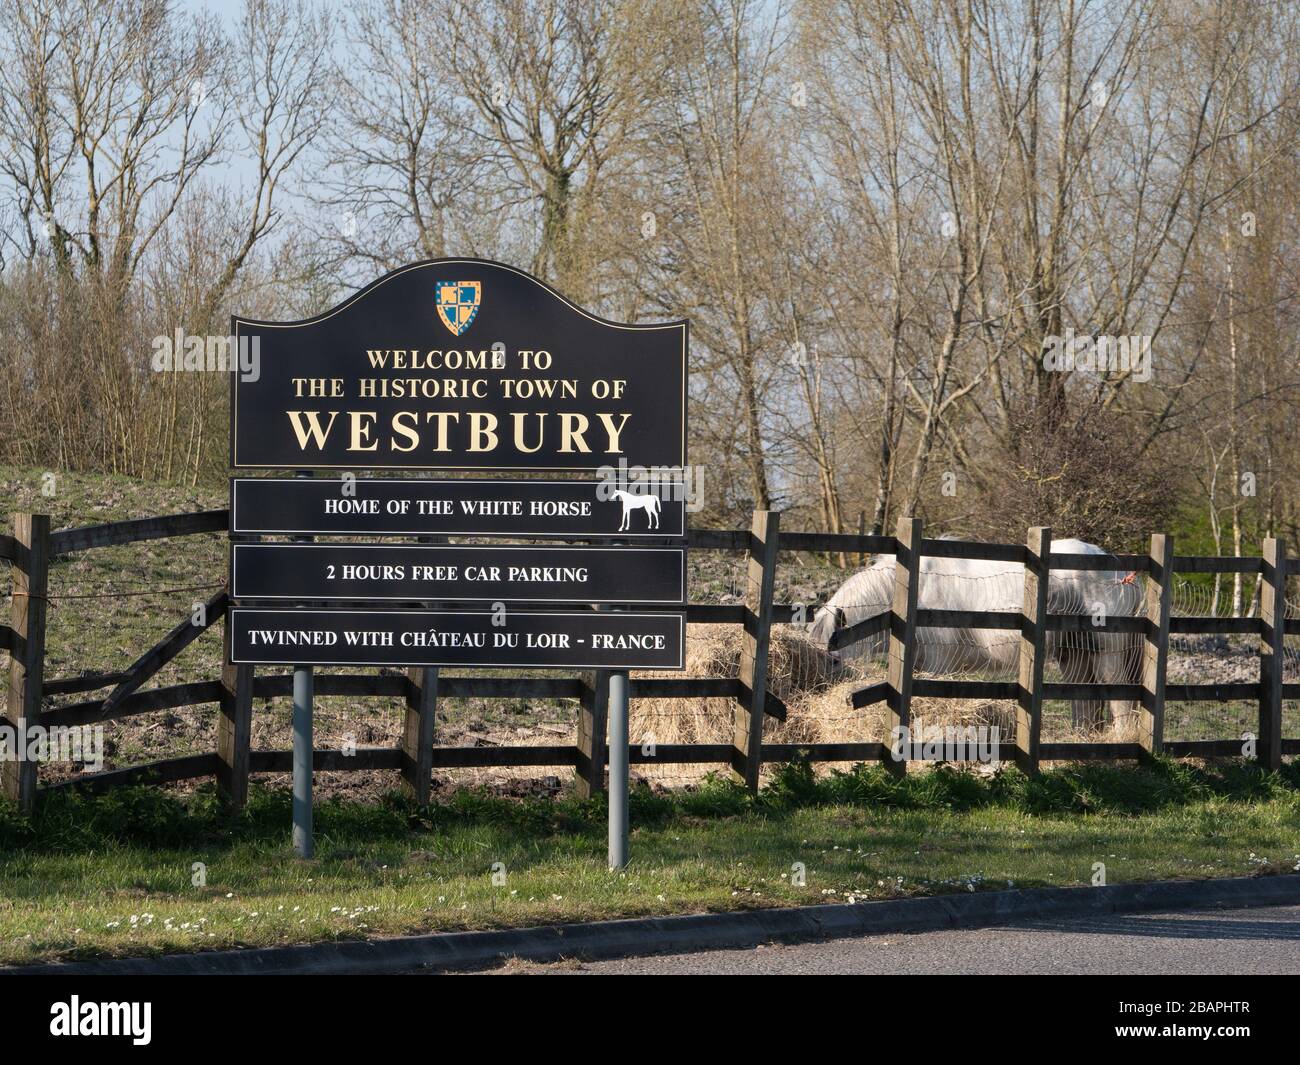 Welcome to Westbury Road sign in Wiltshire, UK. Stock Photo